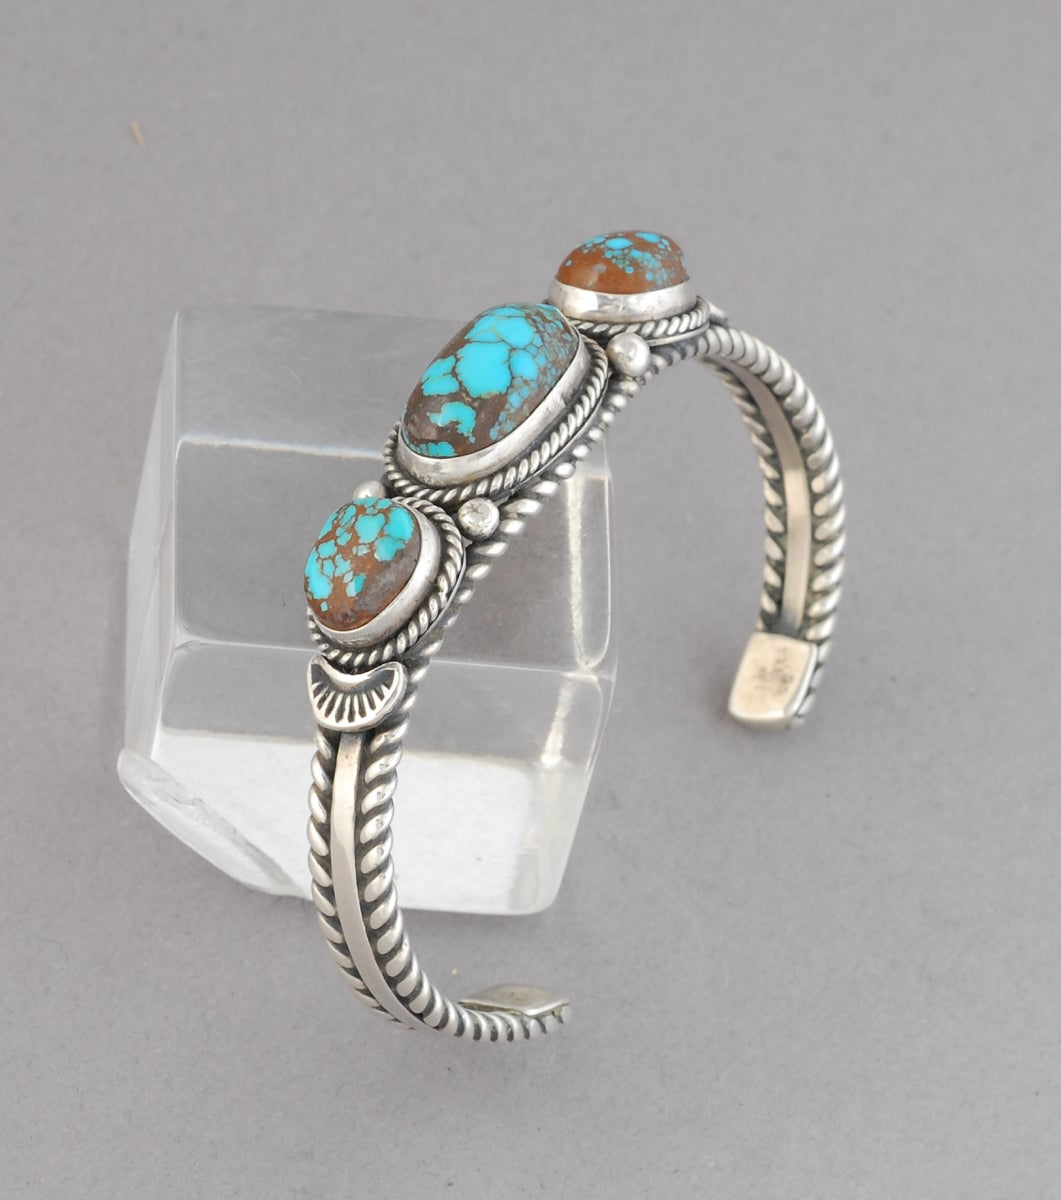 Old Style Cuff Bracelet with Old Persian Turquoise by LaRose Ganadonegro